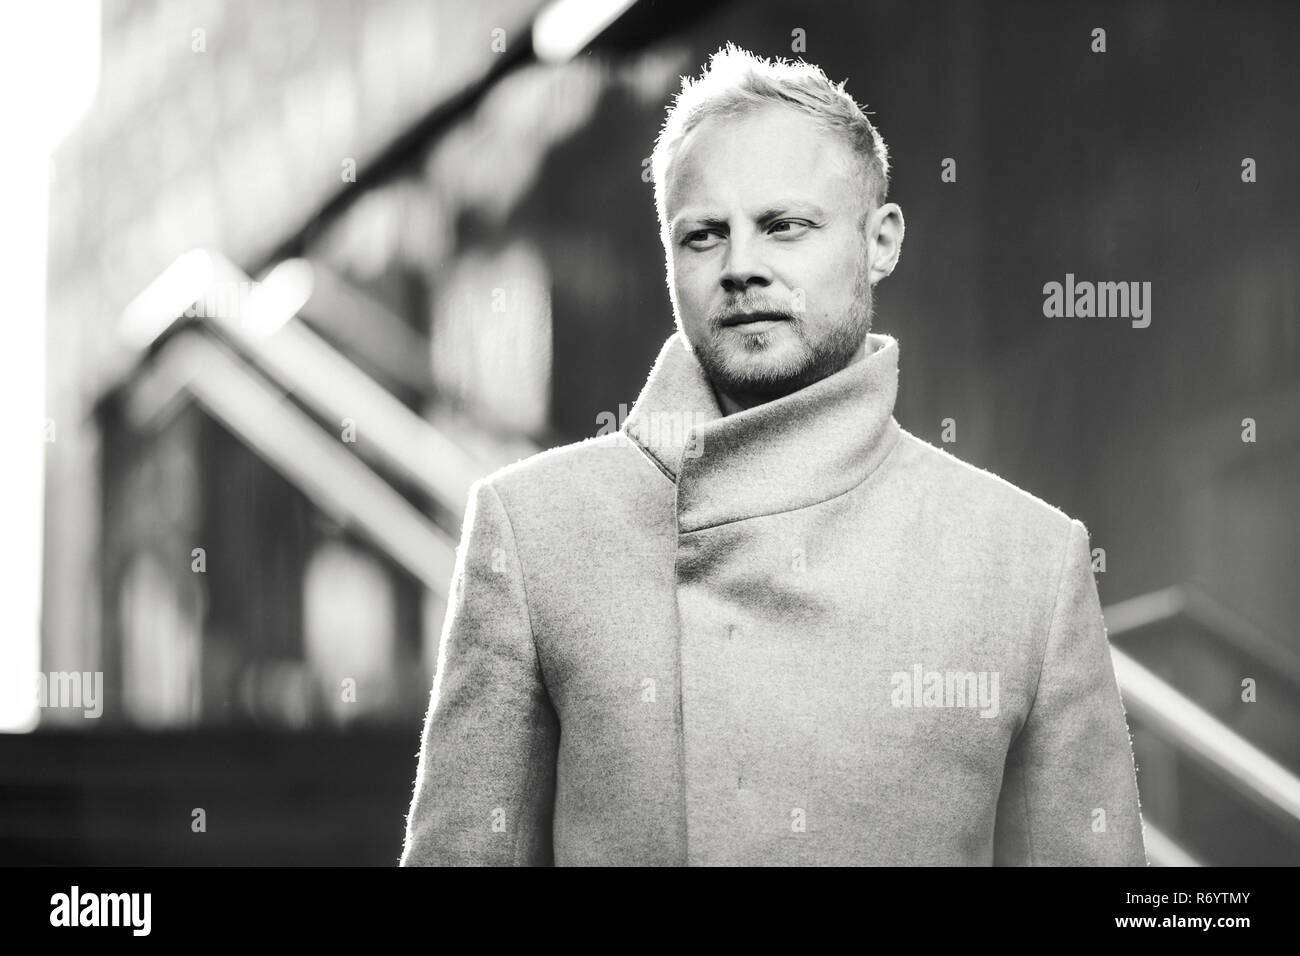 Black and white image of serious man in coat on street, defocused background. Stock Photo